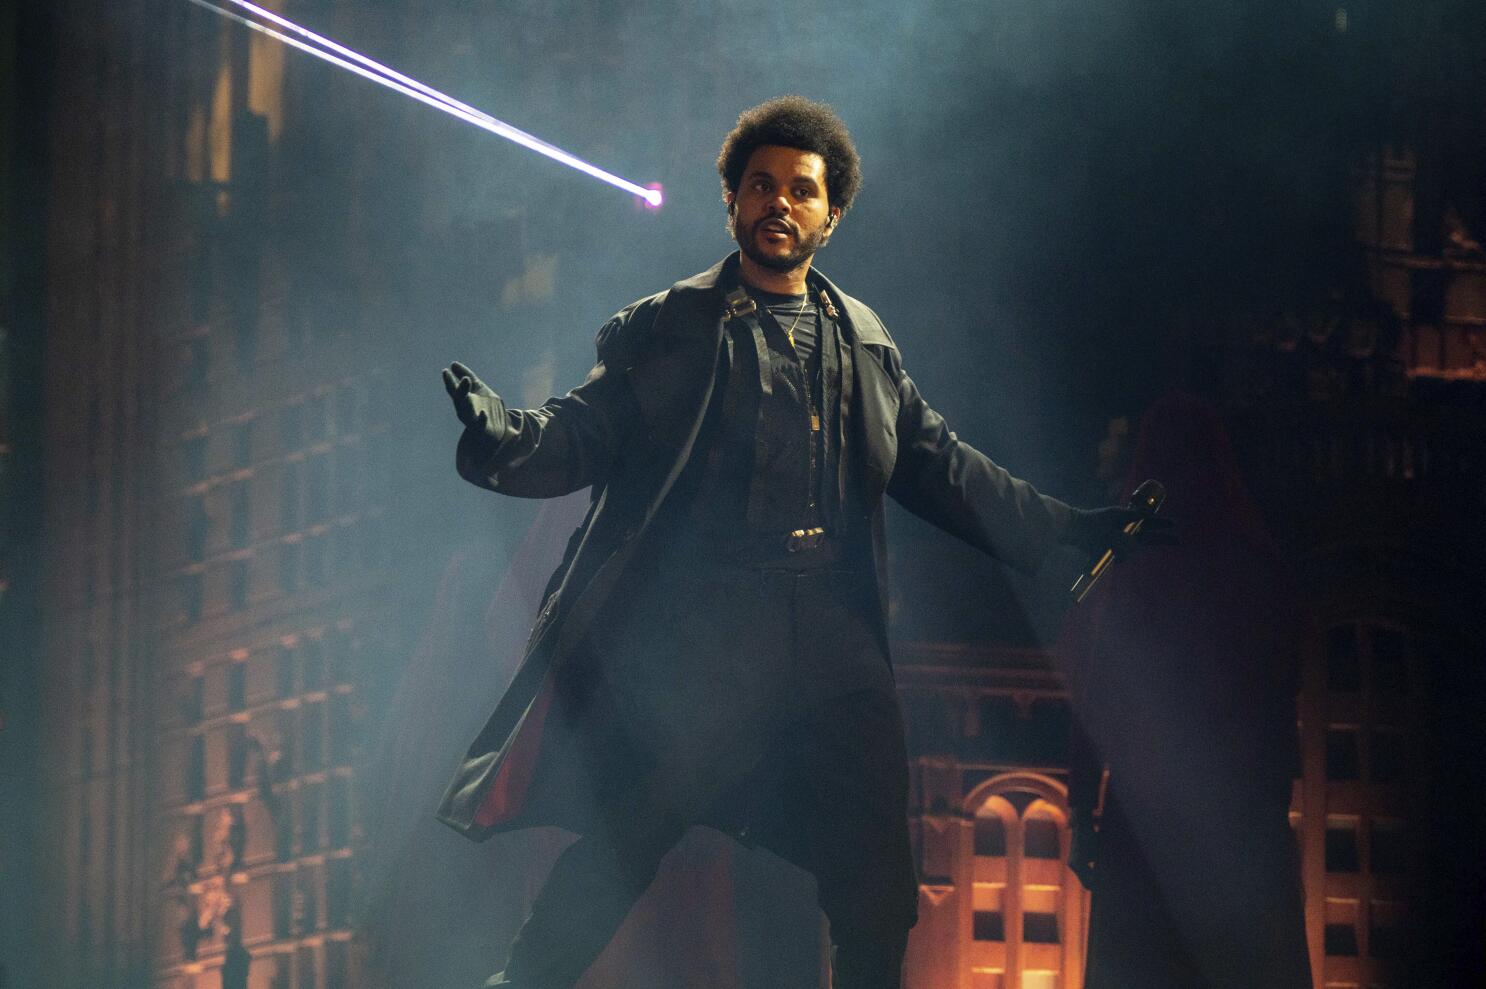 The Weeknd's Halloween Costume Is Hot Seller